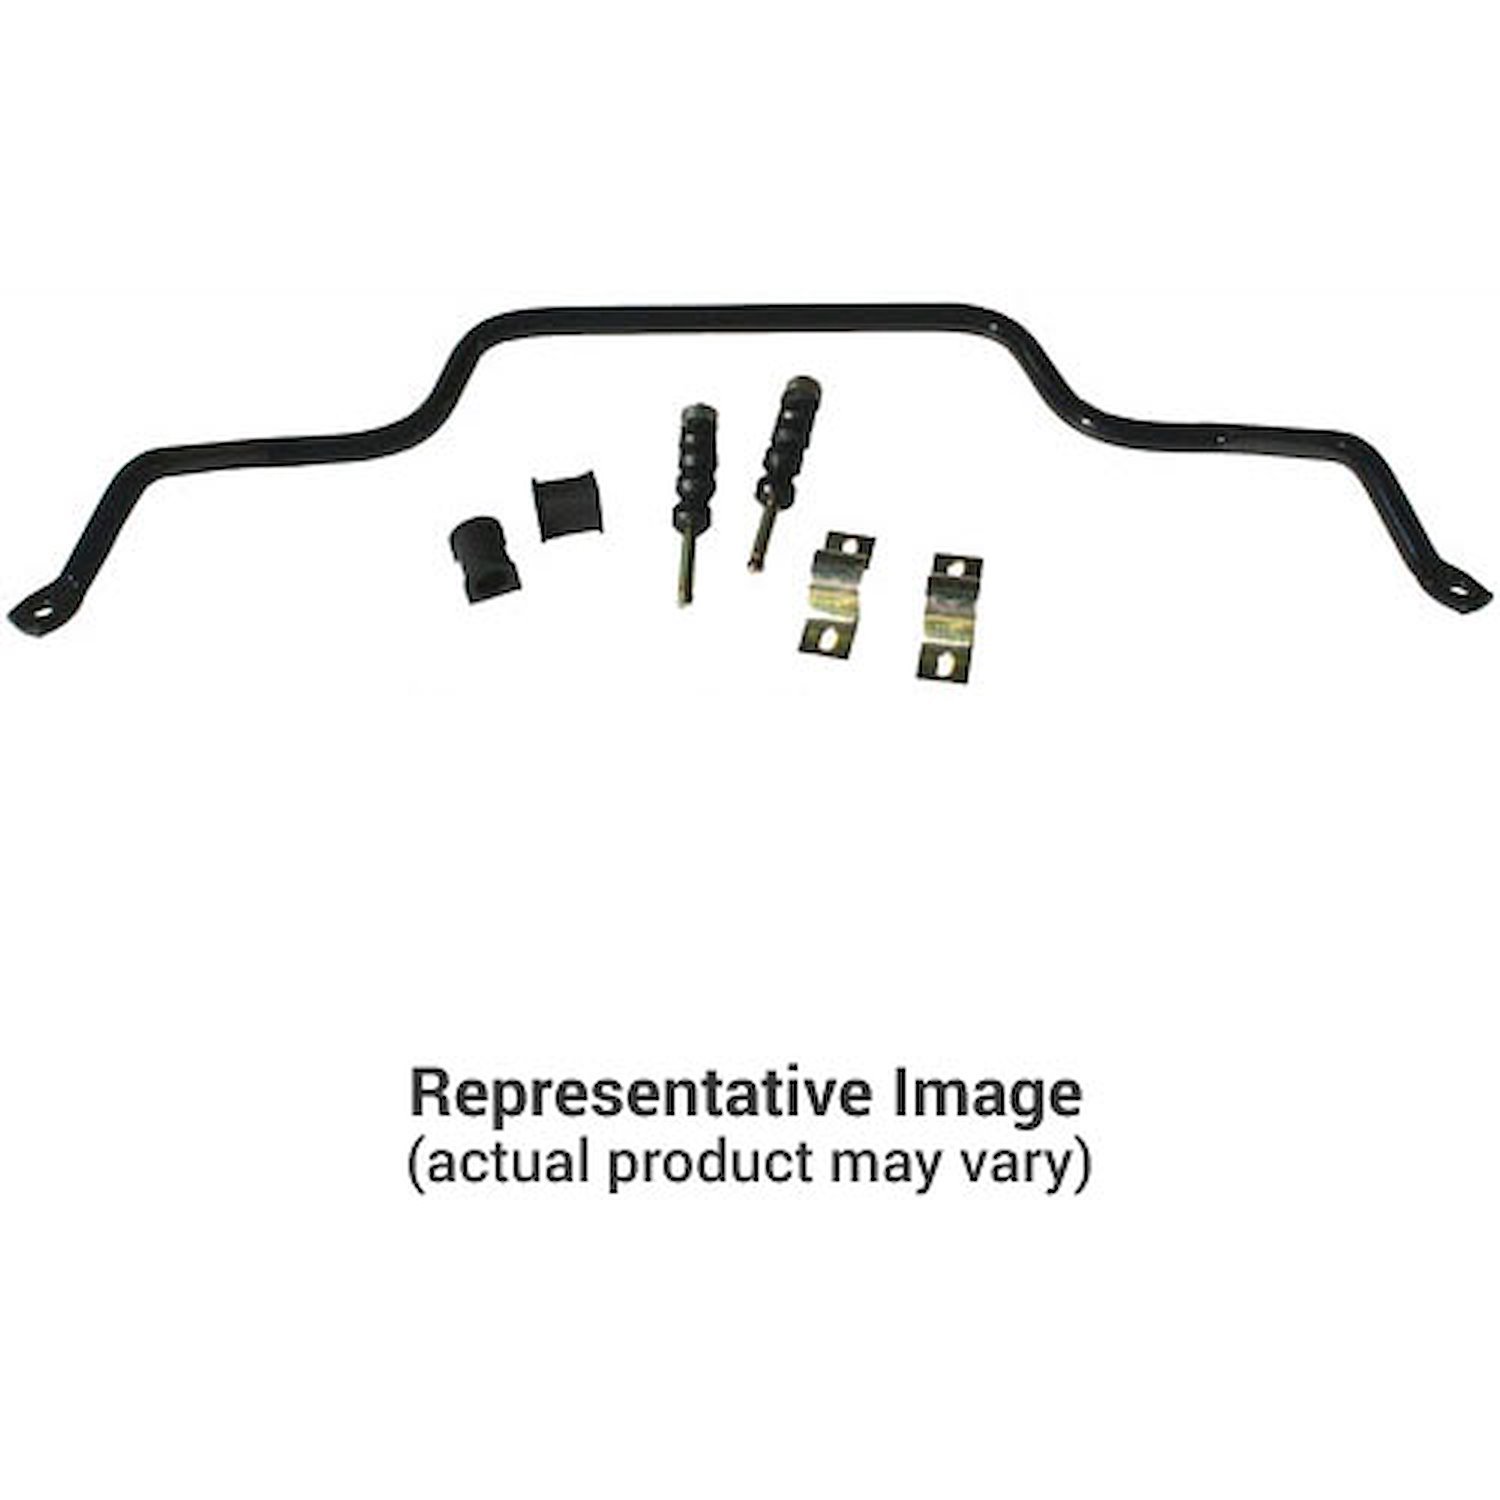 1" Front Sway Bar 1992-96 Ford F-150 Pickup